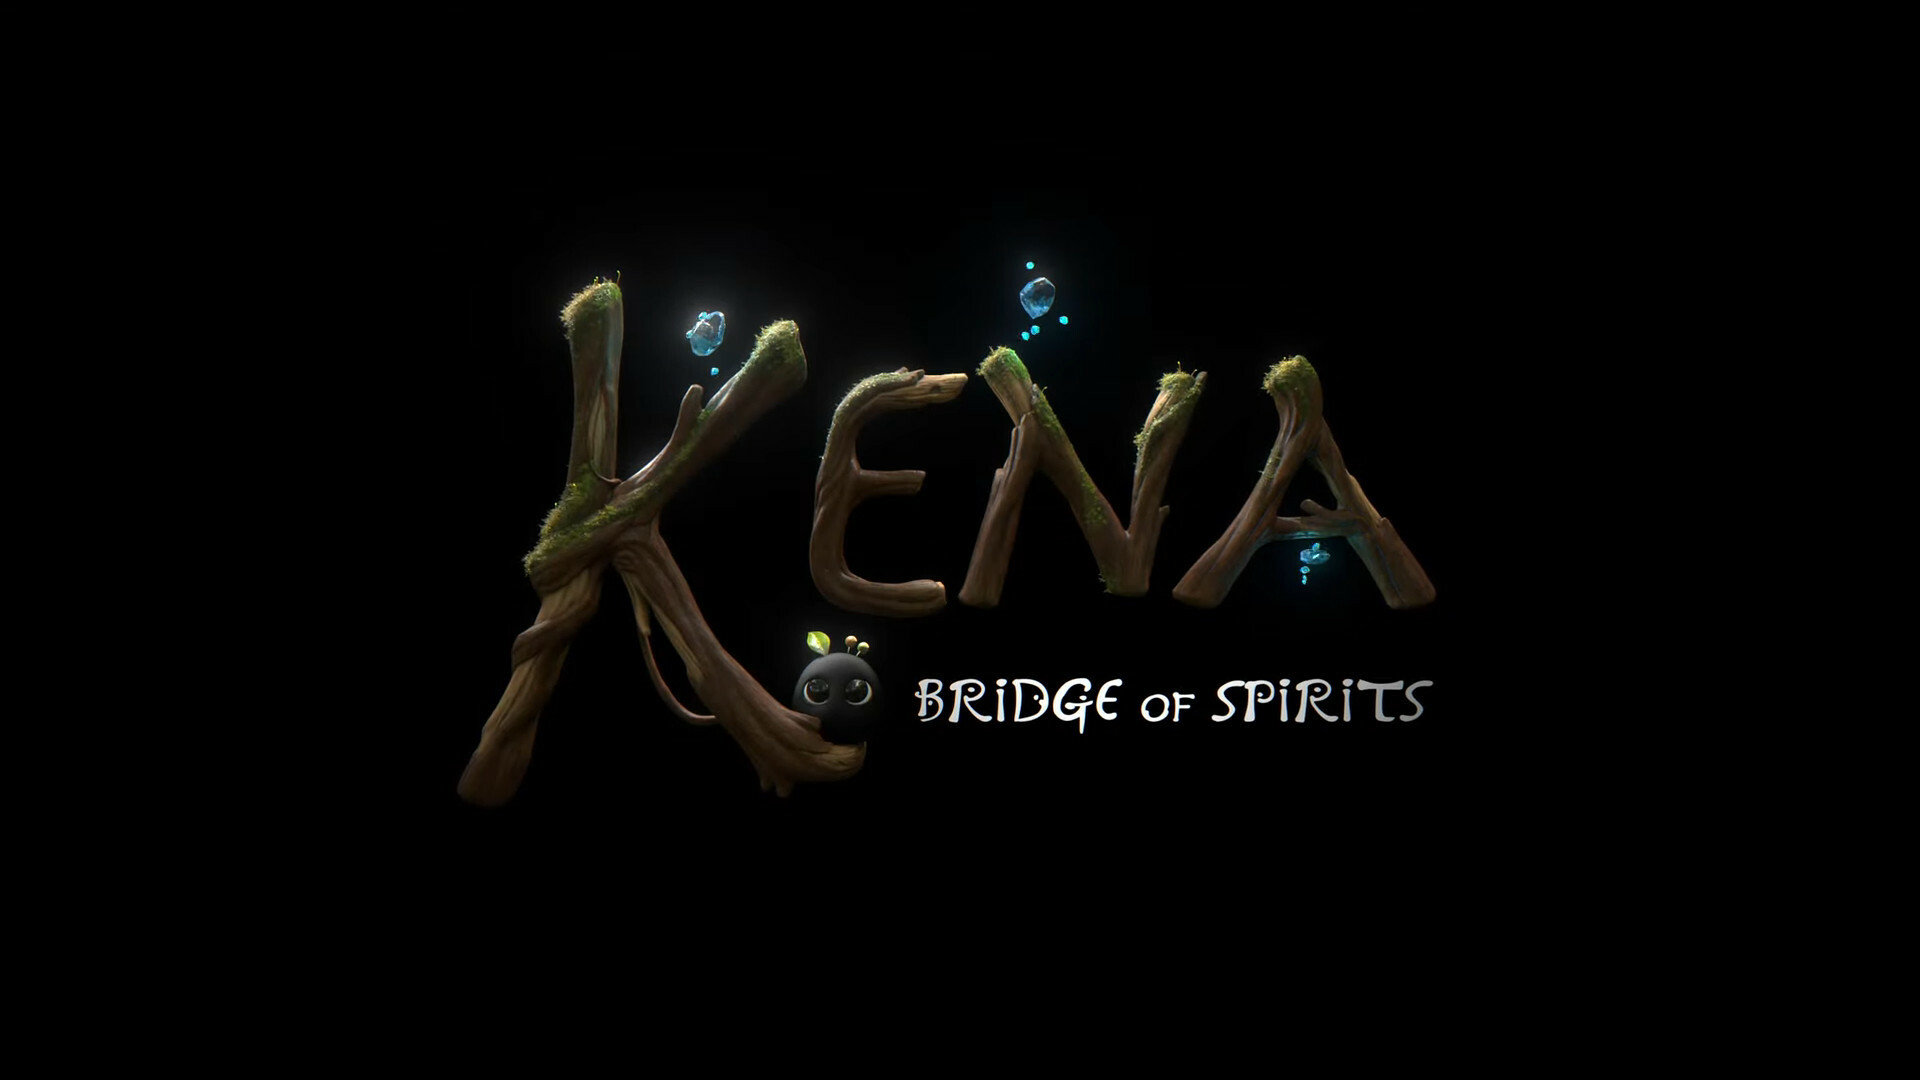 Kena: Bridge of Spirits: The game follows the story of a young girl and spirit guide. 1920x1080 Full HD Background.